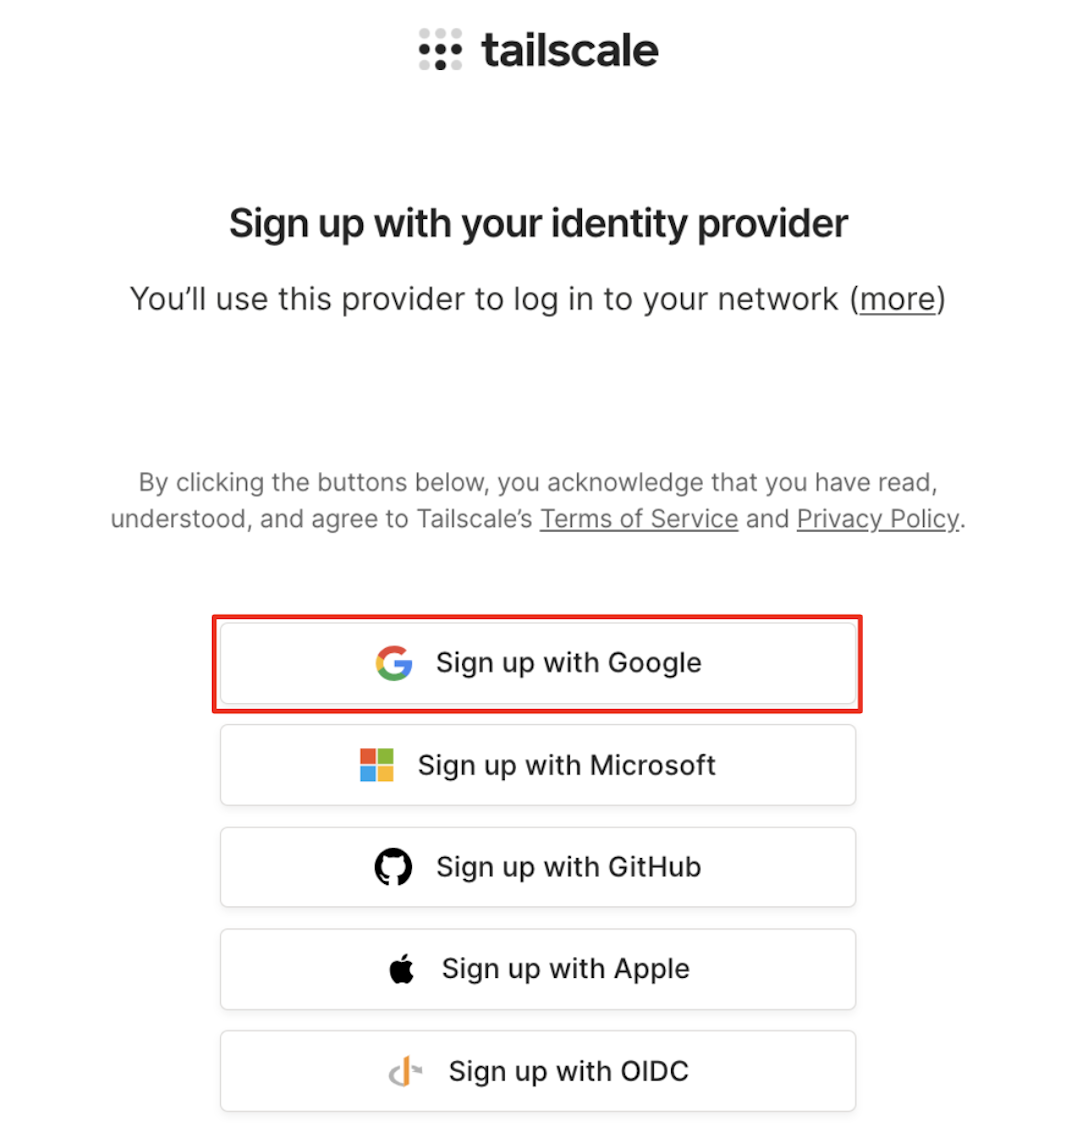 Select Google when signing up to Tailscale